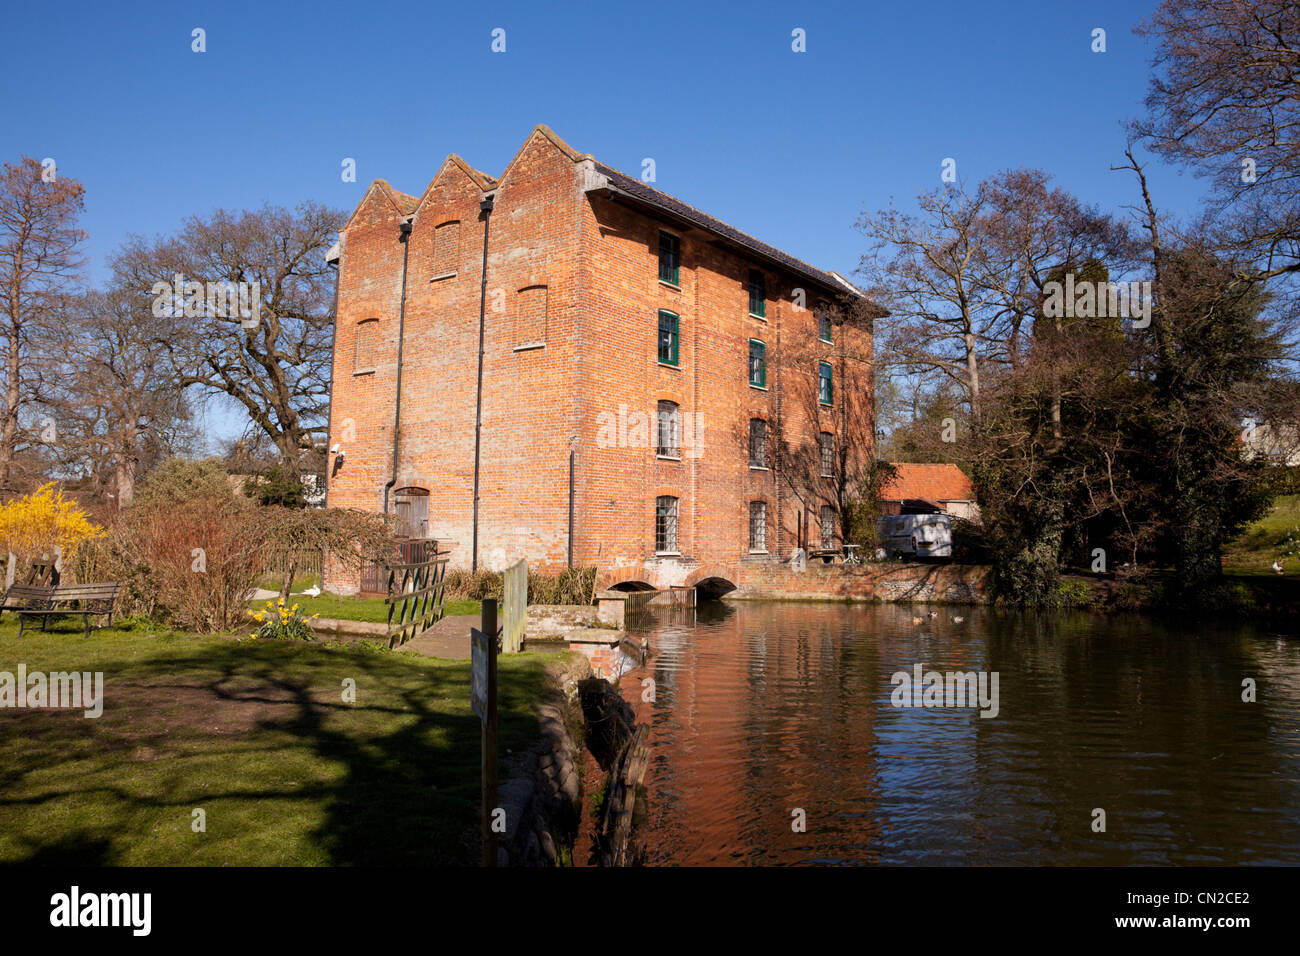 Watermill at Letheringsett, North Norfolk, England. Stock Photo